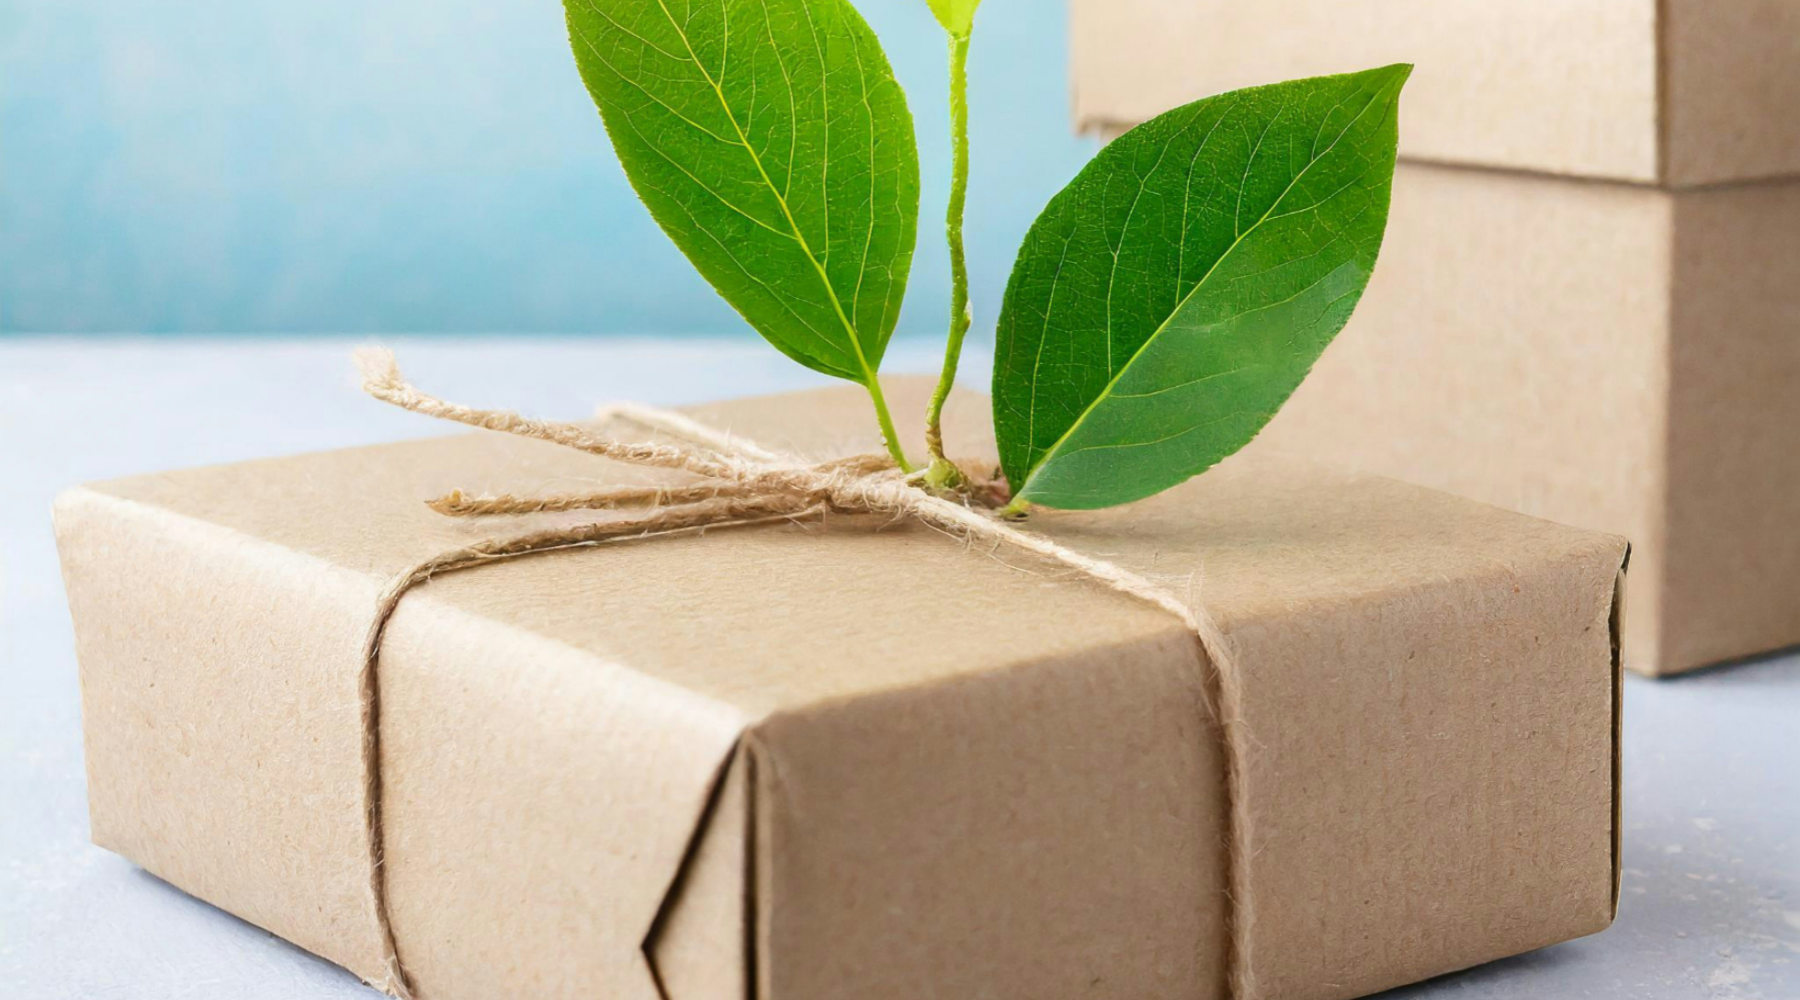 Sustainable Packaging Solutions for Small Businesses